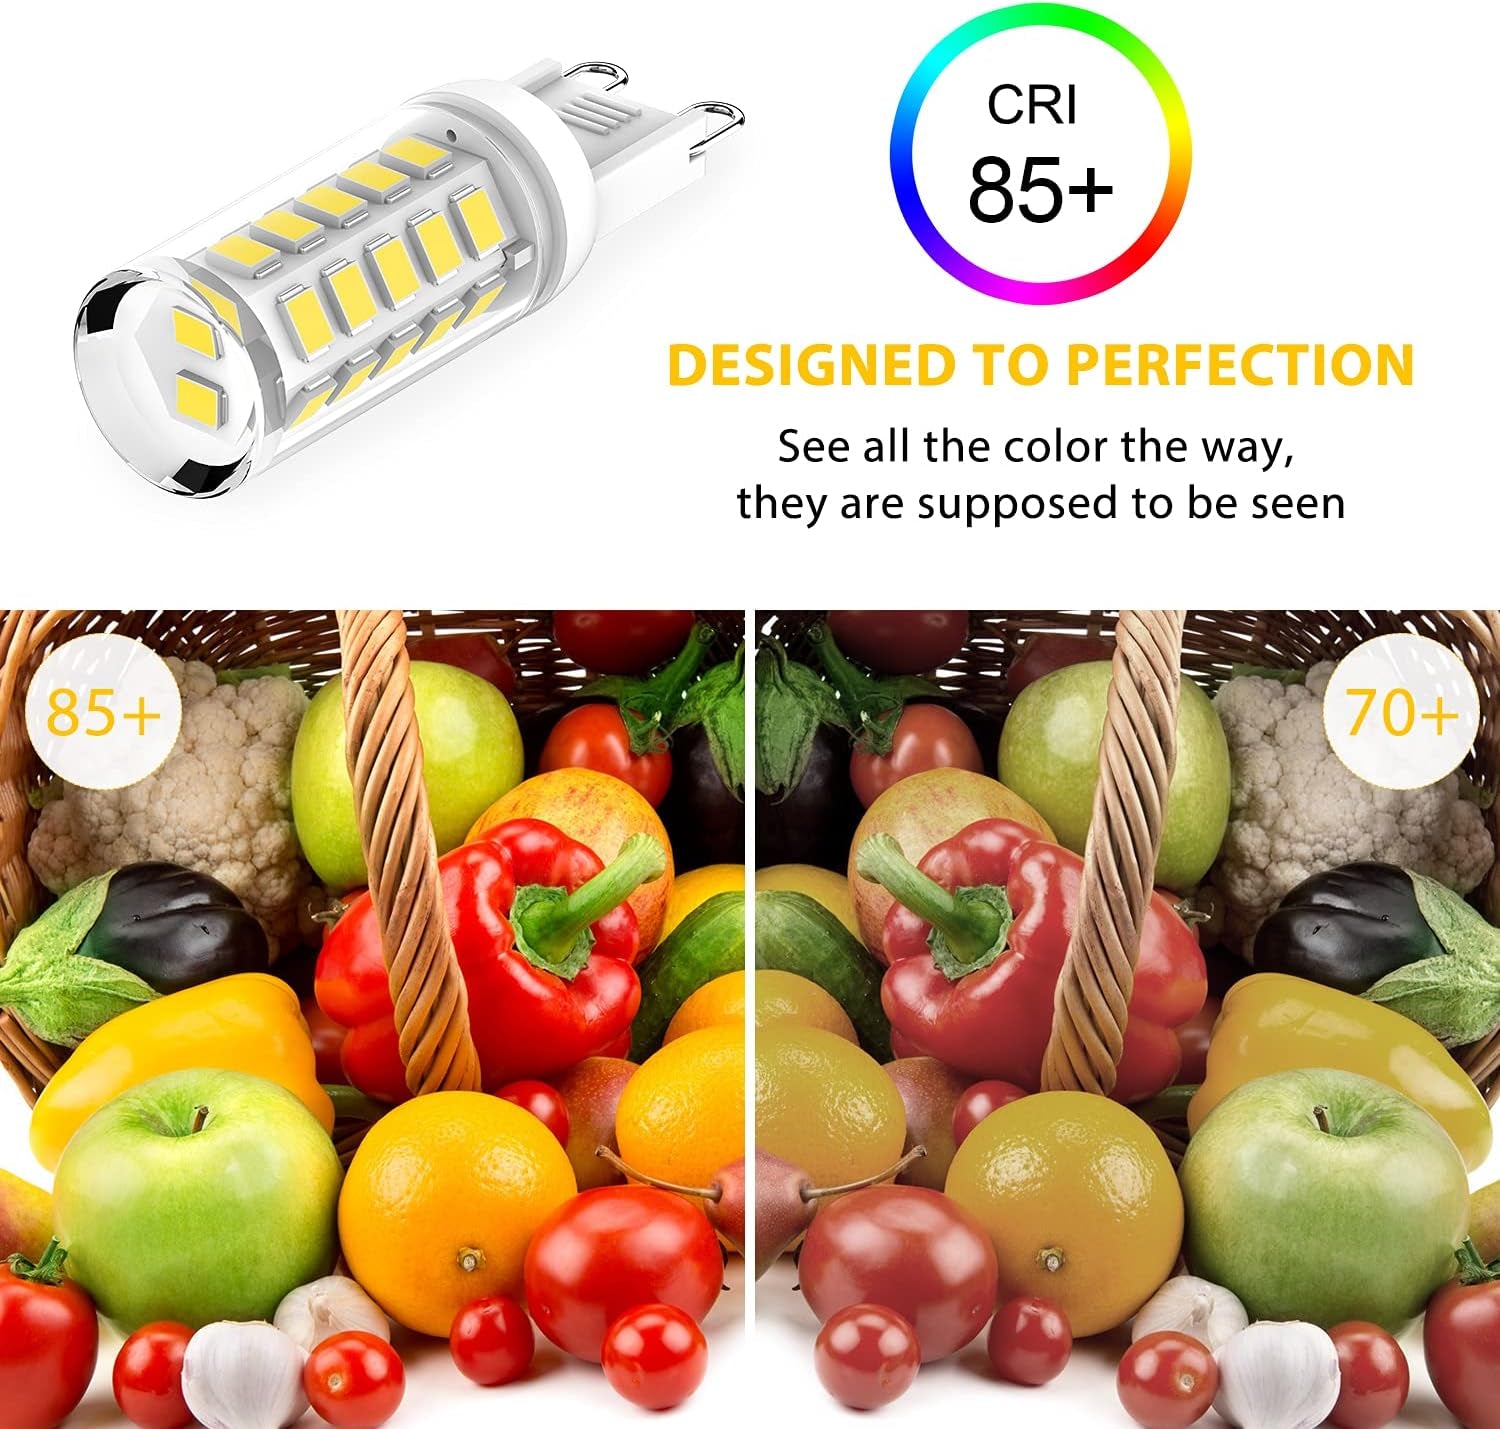 G9 LED Bulb Dimmable, 4W, 40W Halogen Equivalent, 5000K Daylight White, AC 120V G9 Bi Pin Base Light Bulbs, 380LM, No Flicker, 360° Beam Angle, Pack of 6